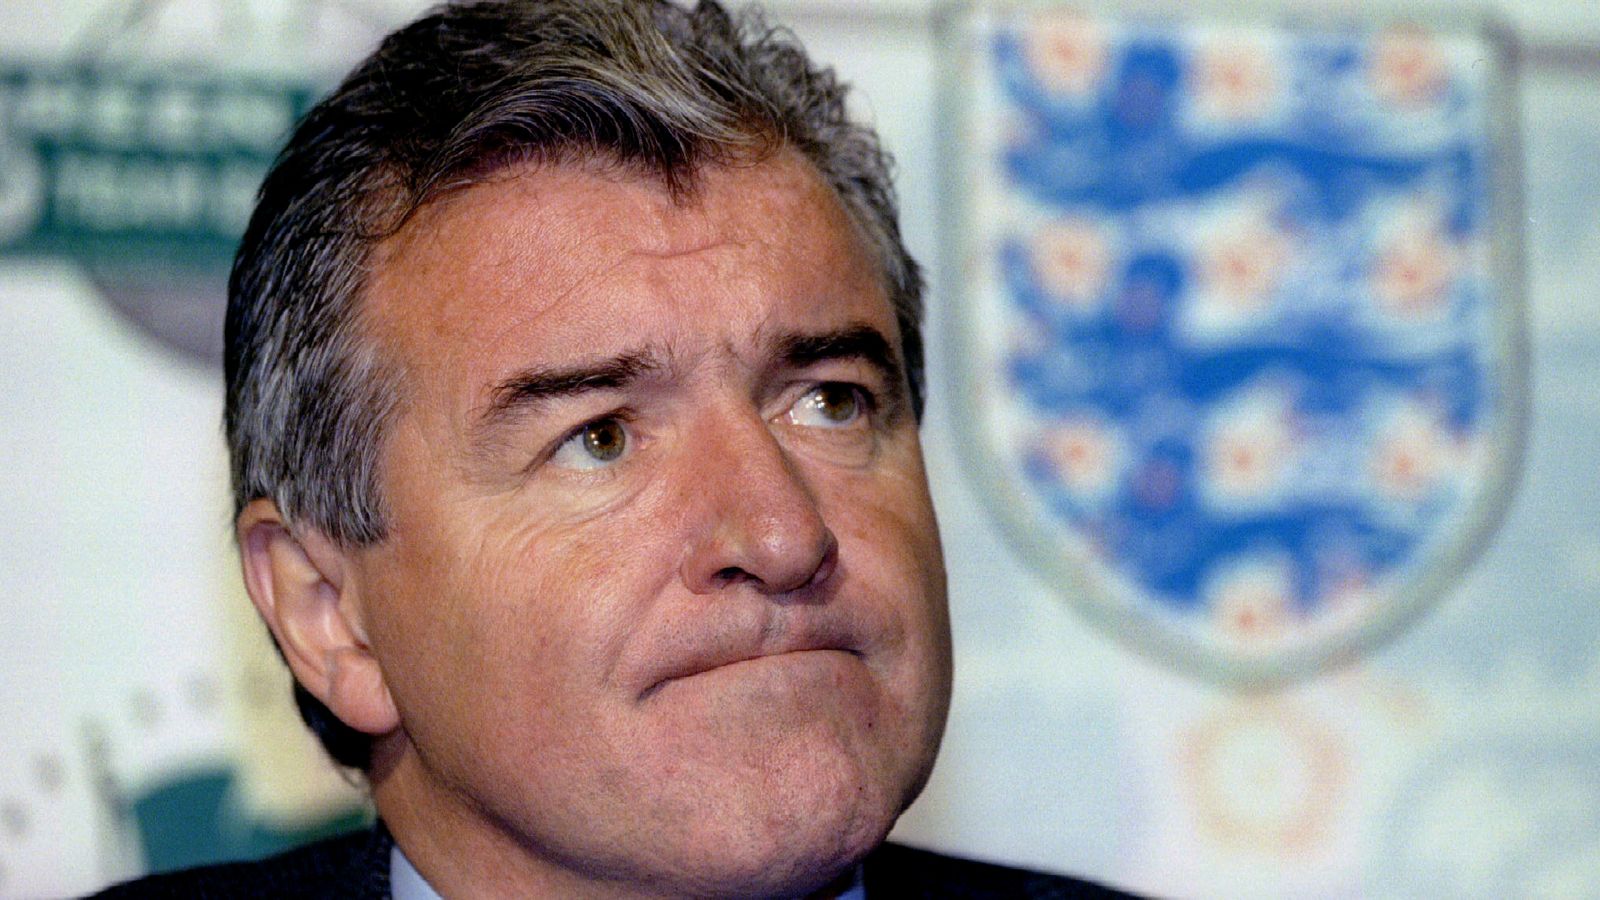 Terry Venables: Former England manager dies aged 80 | UK News | Sky News